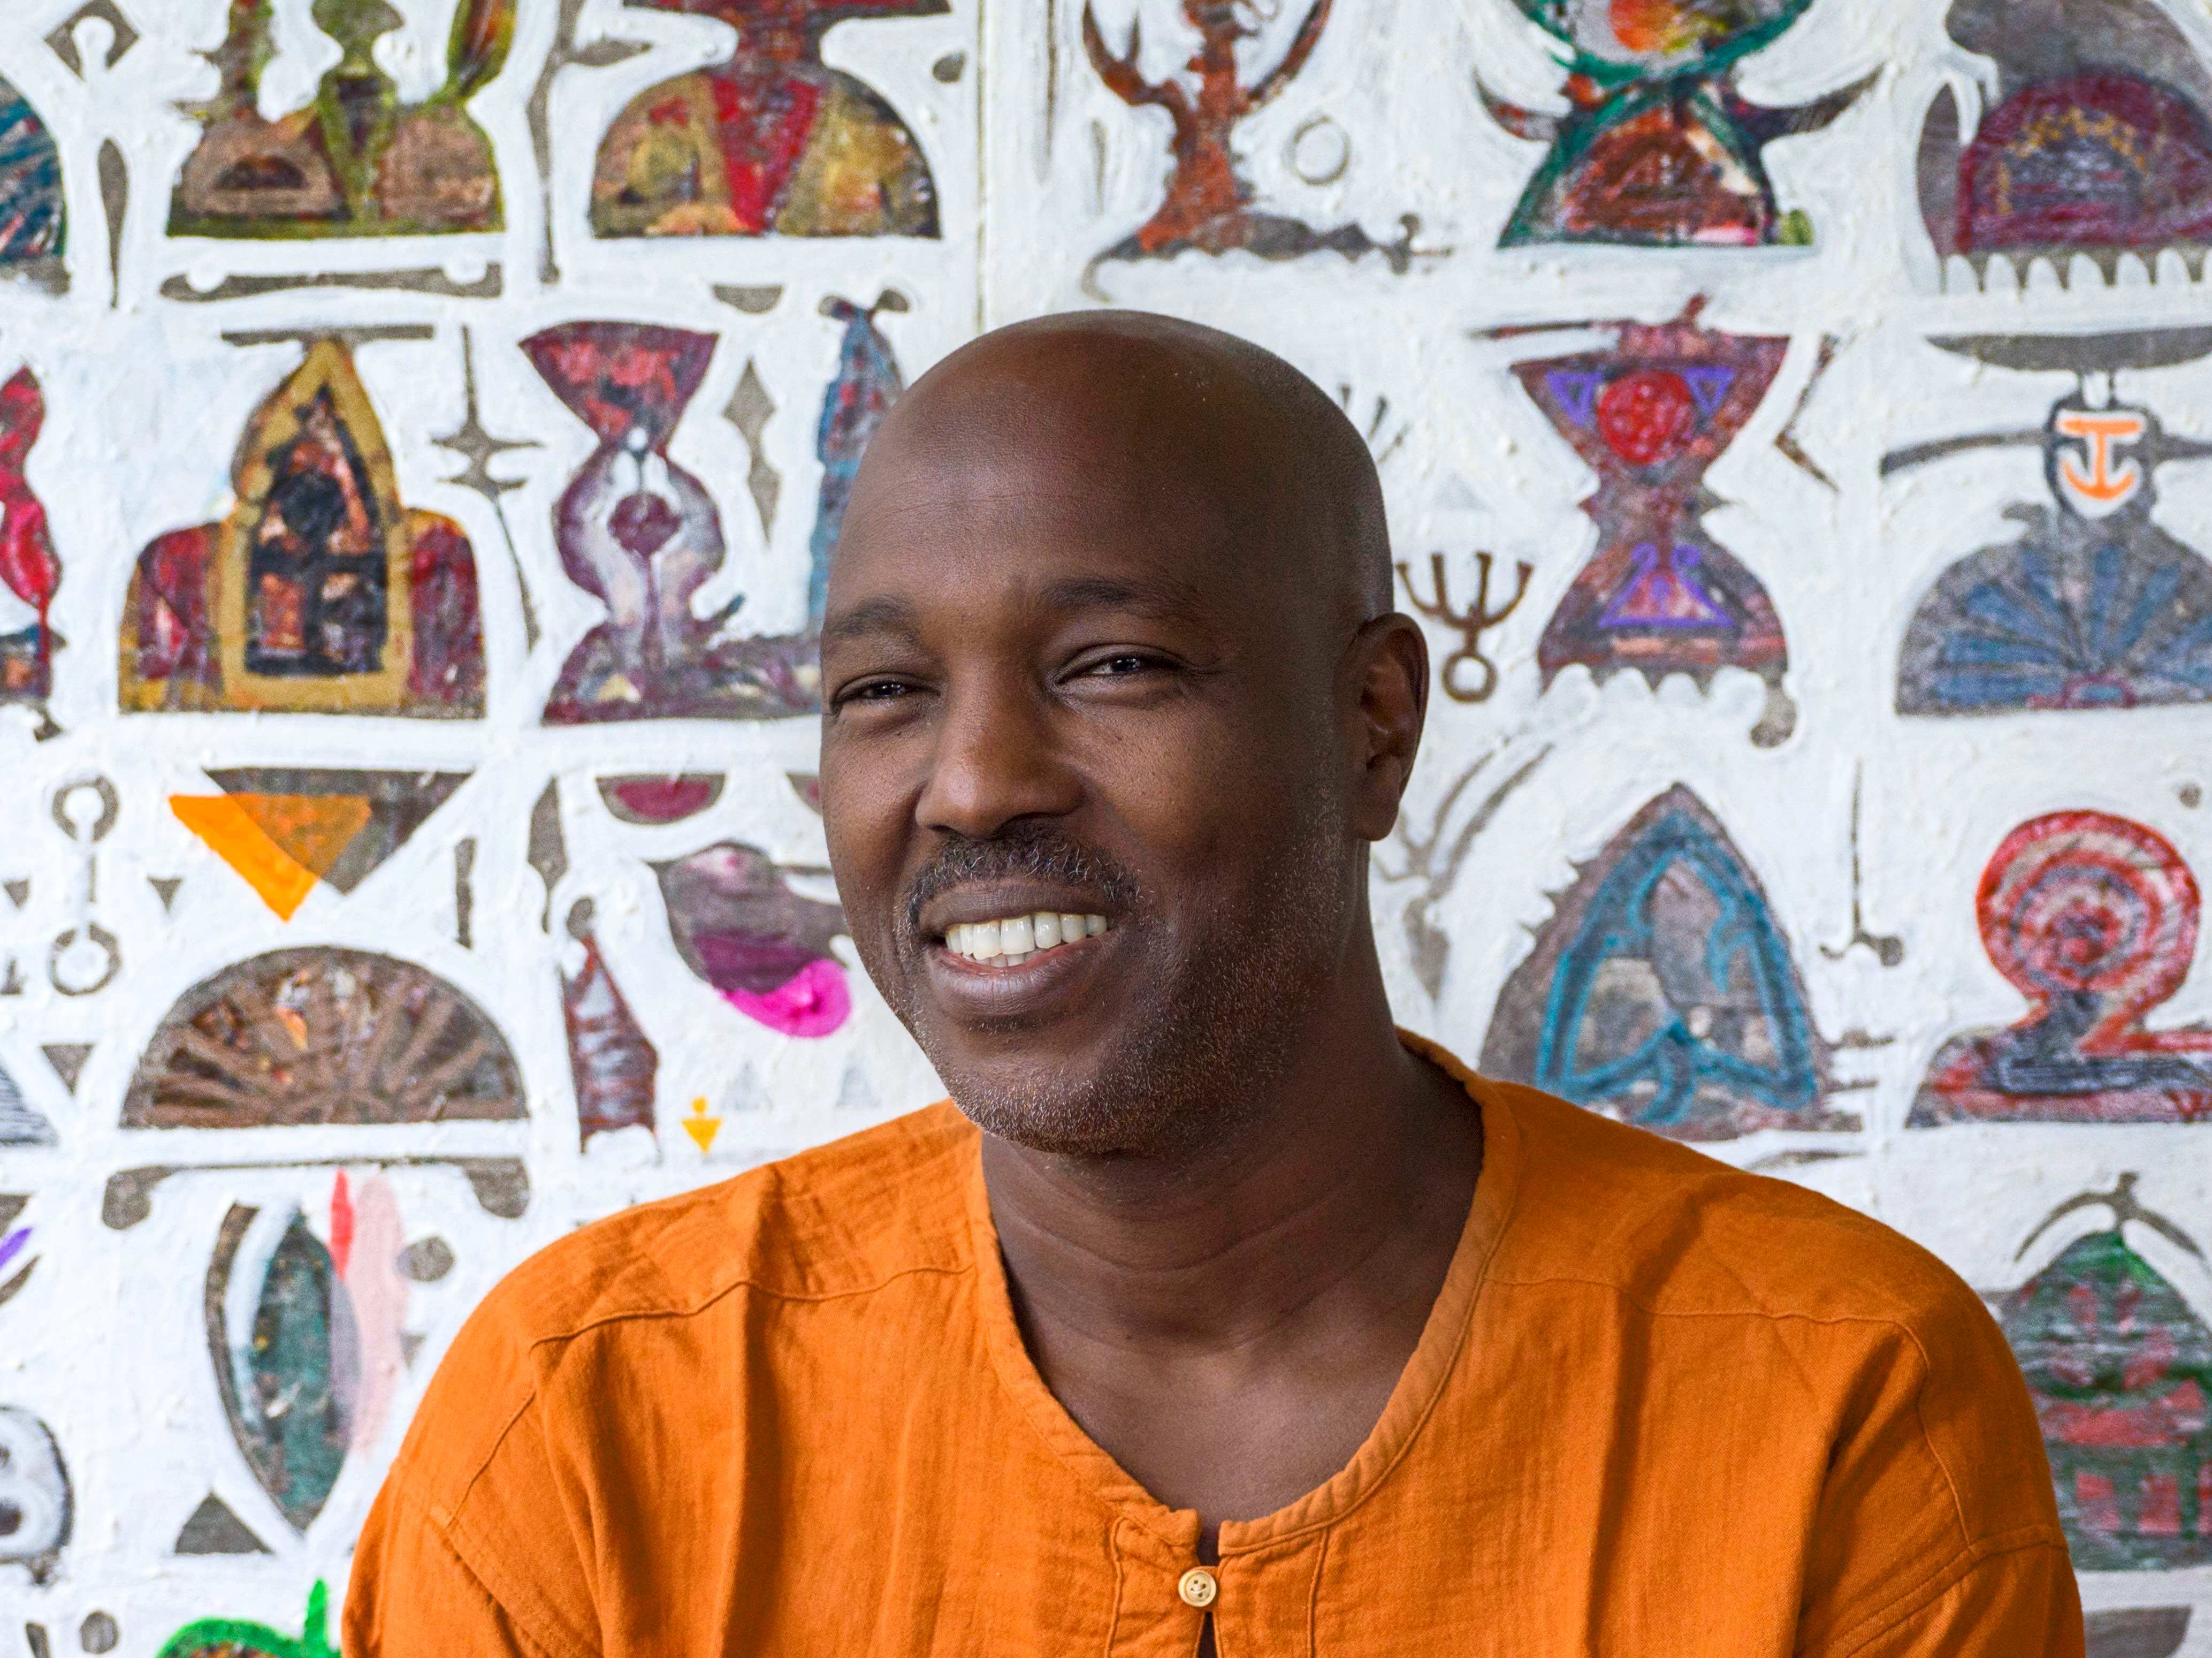 Hussein Salim says the journey of an artist is to find his place in the world. Salim’s place is in South Africa. Picture by Clint Strydom